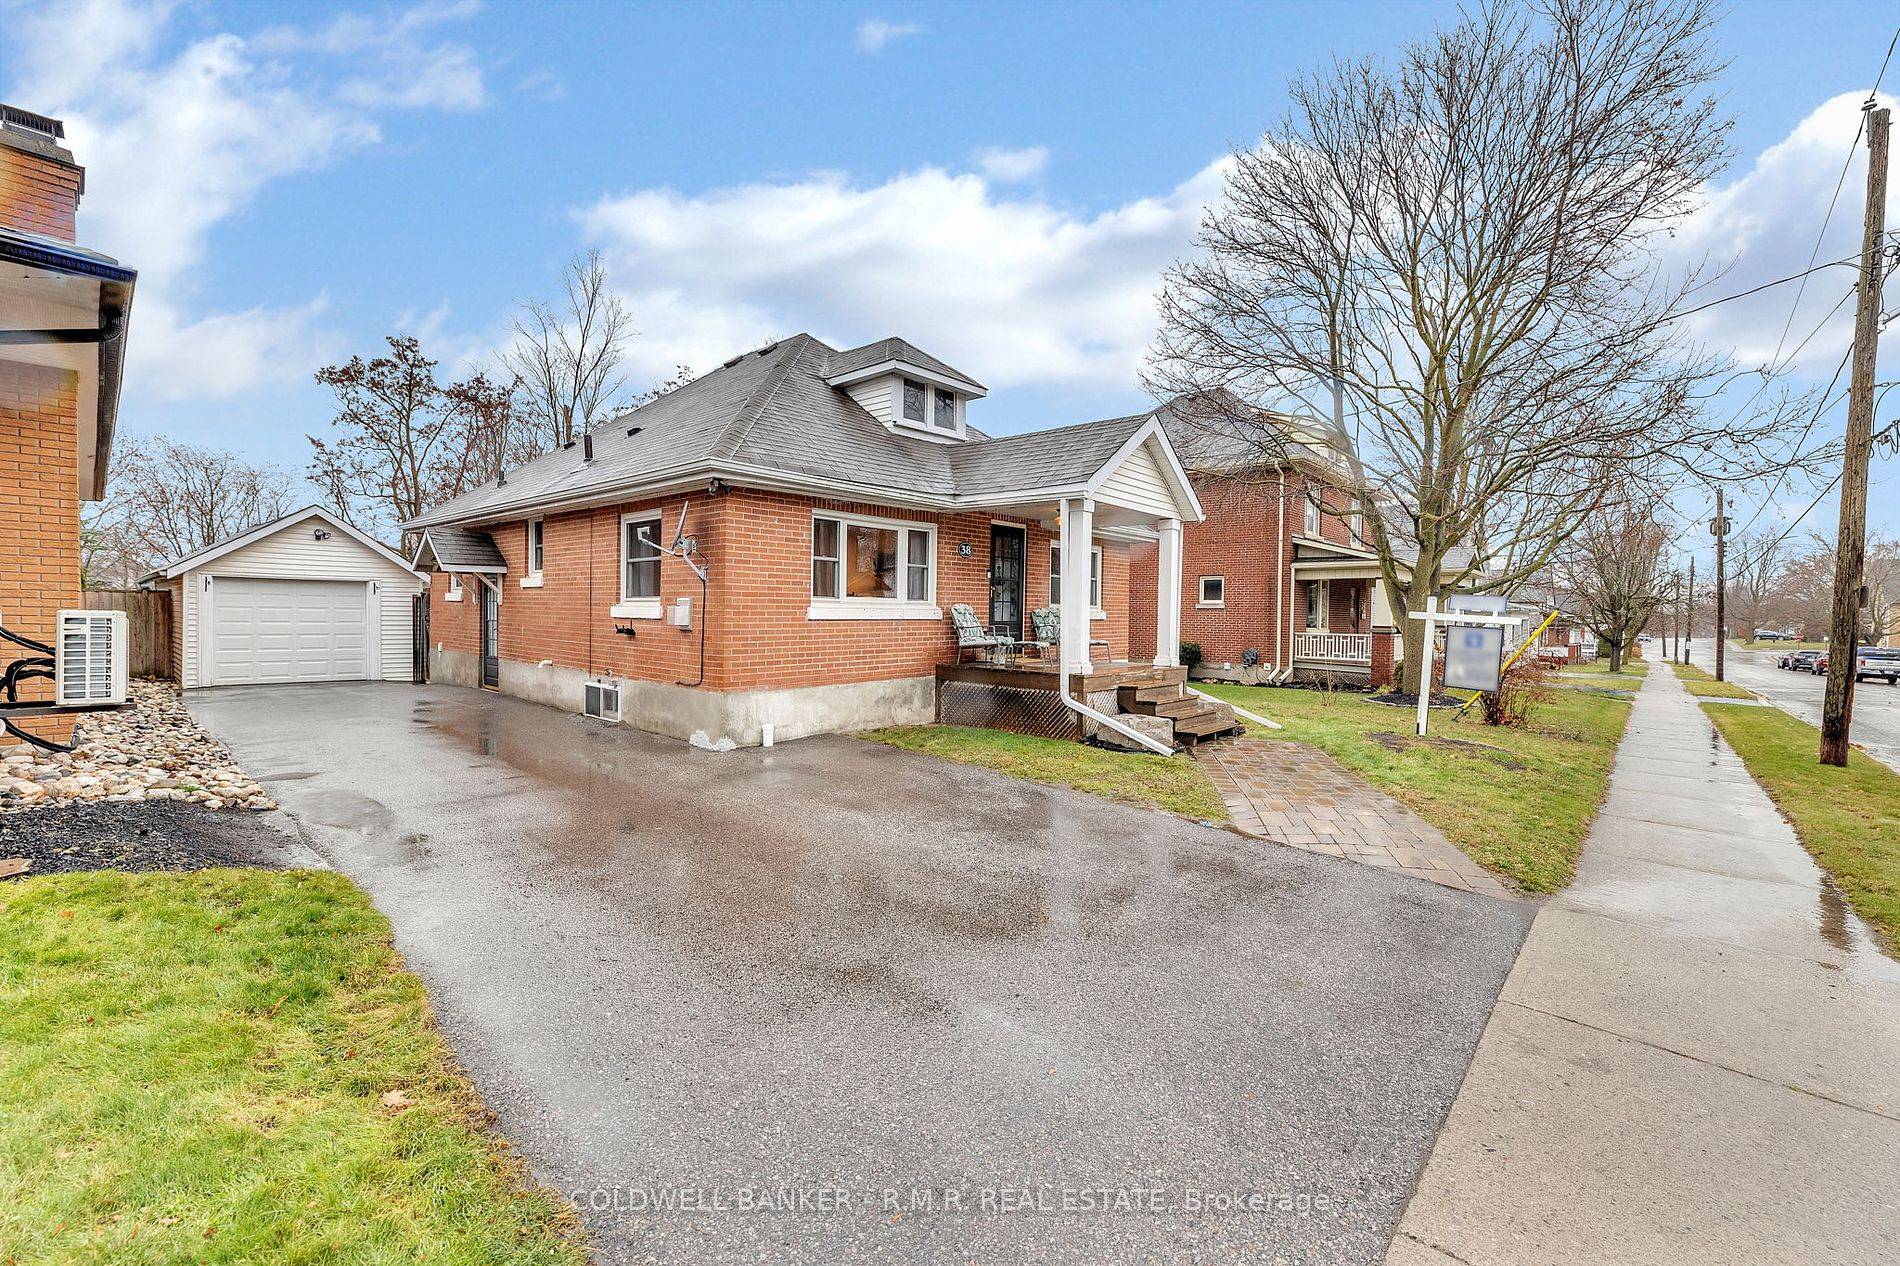 Discover the ultimate comfort and style in this move in ready brick bungalow.